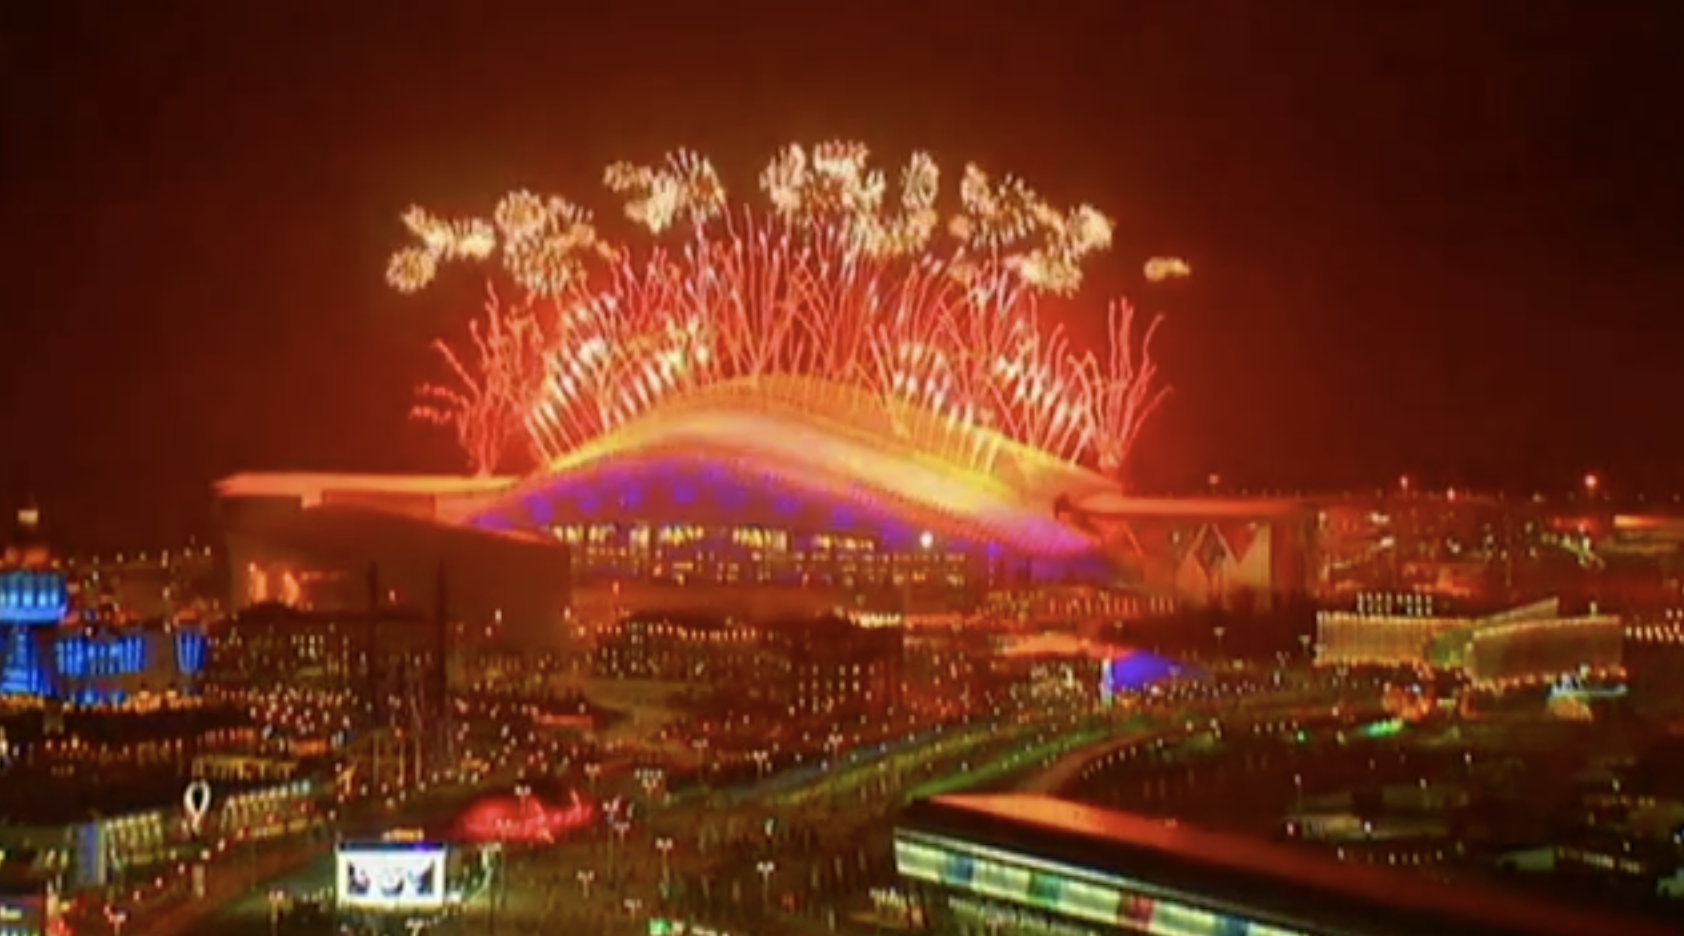 Russia lightens up with softer image at Closing Ceremony